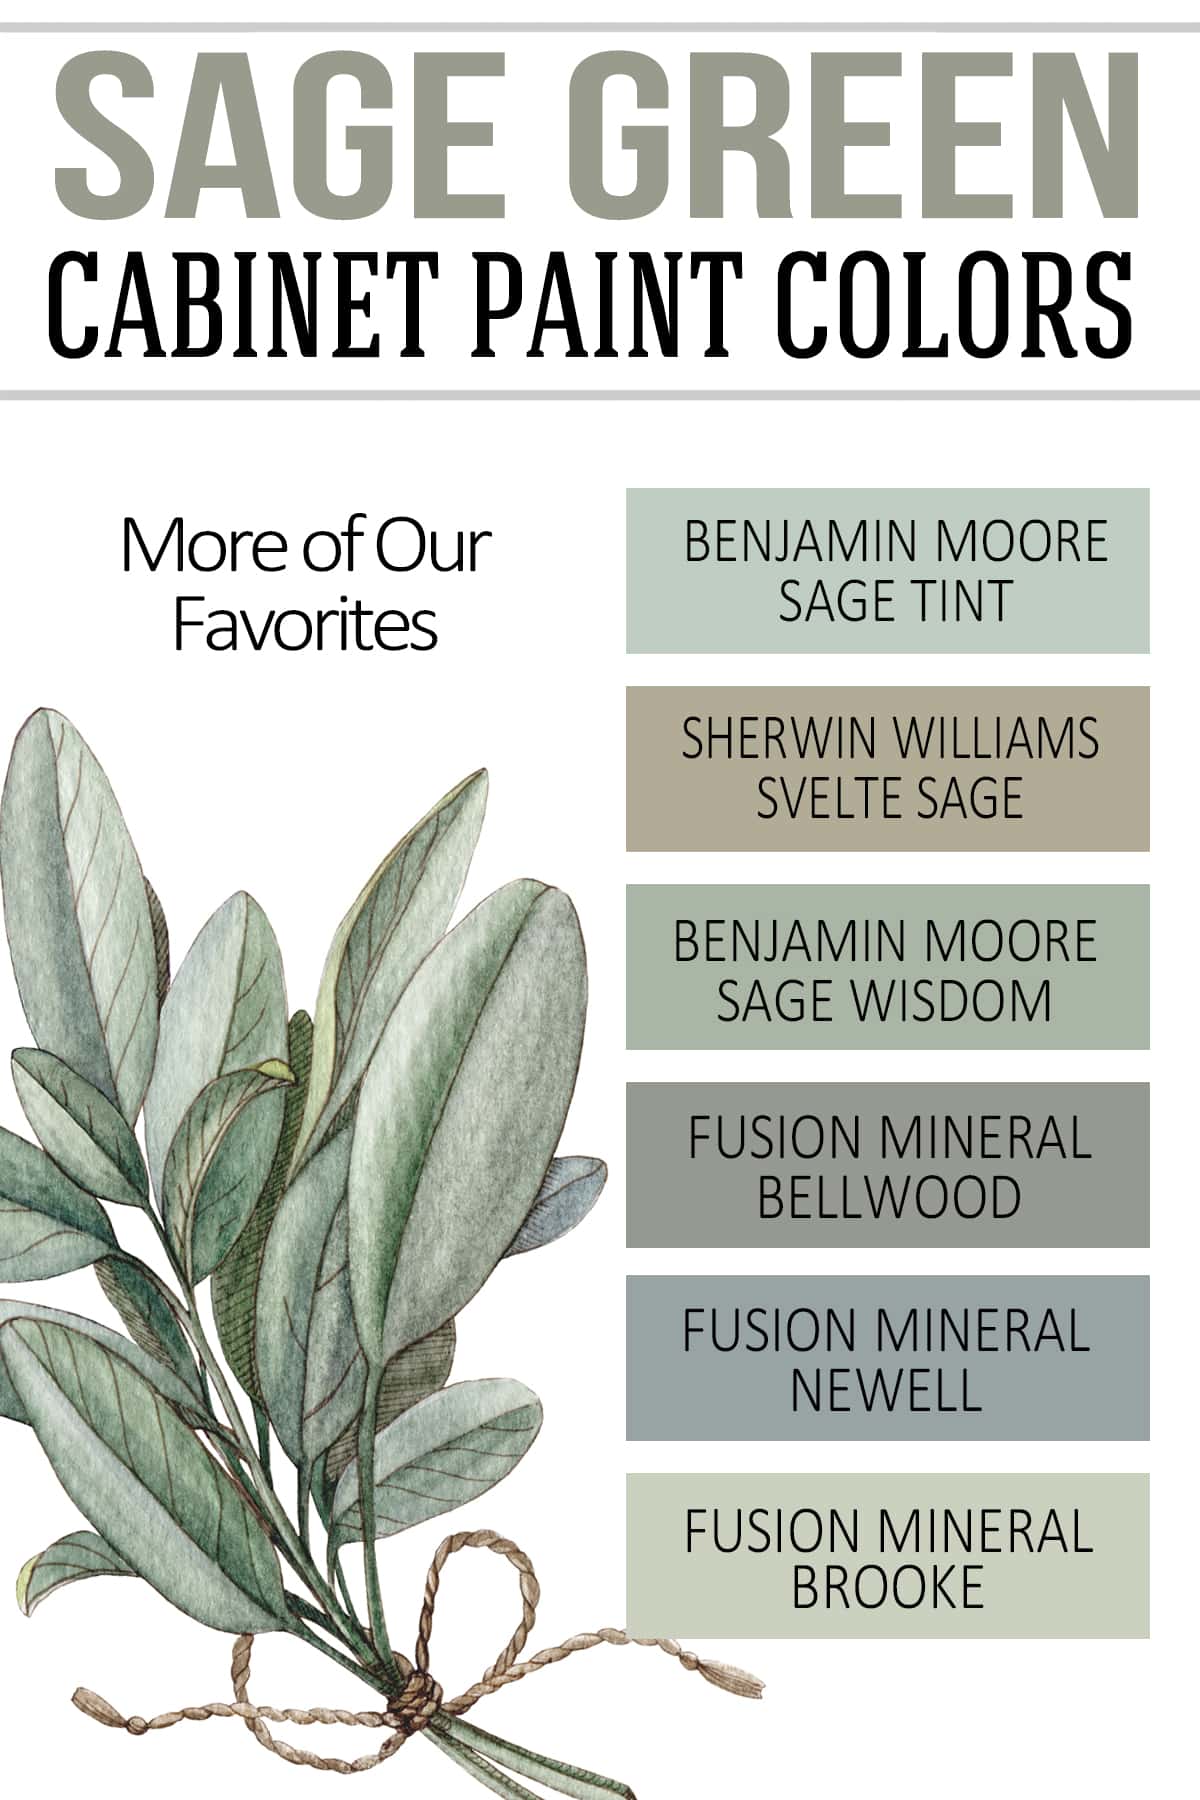 Collage of sage green paint colors from Bejamin Moore, Sherwin Williams, and Fusion Mineral with a sage plant next to the swatches.